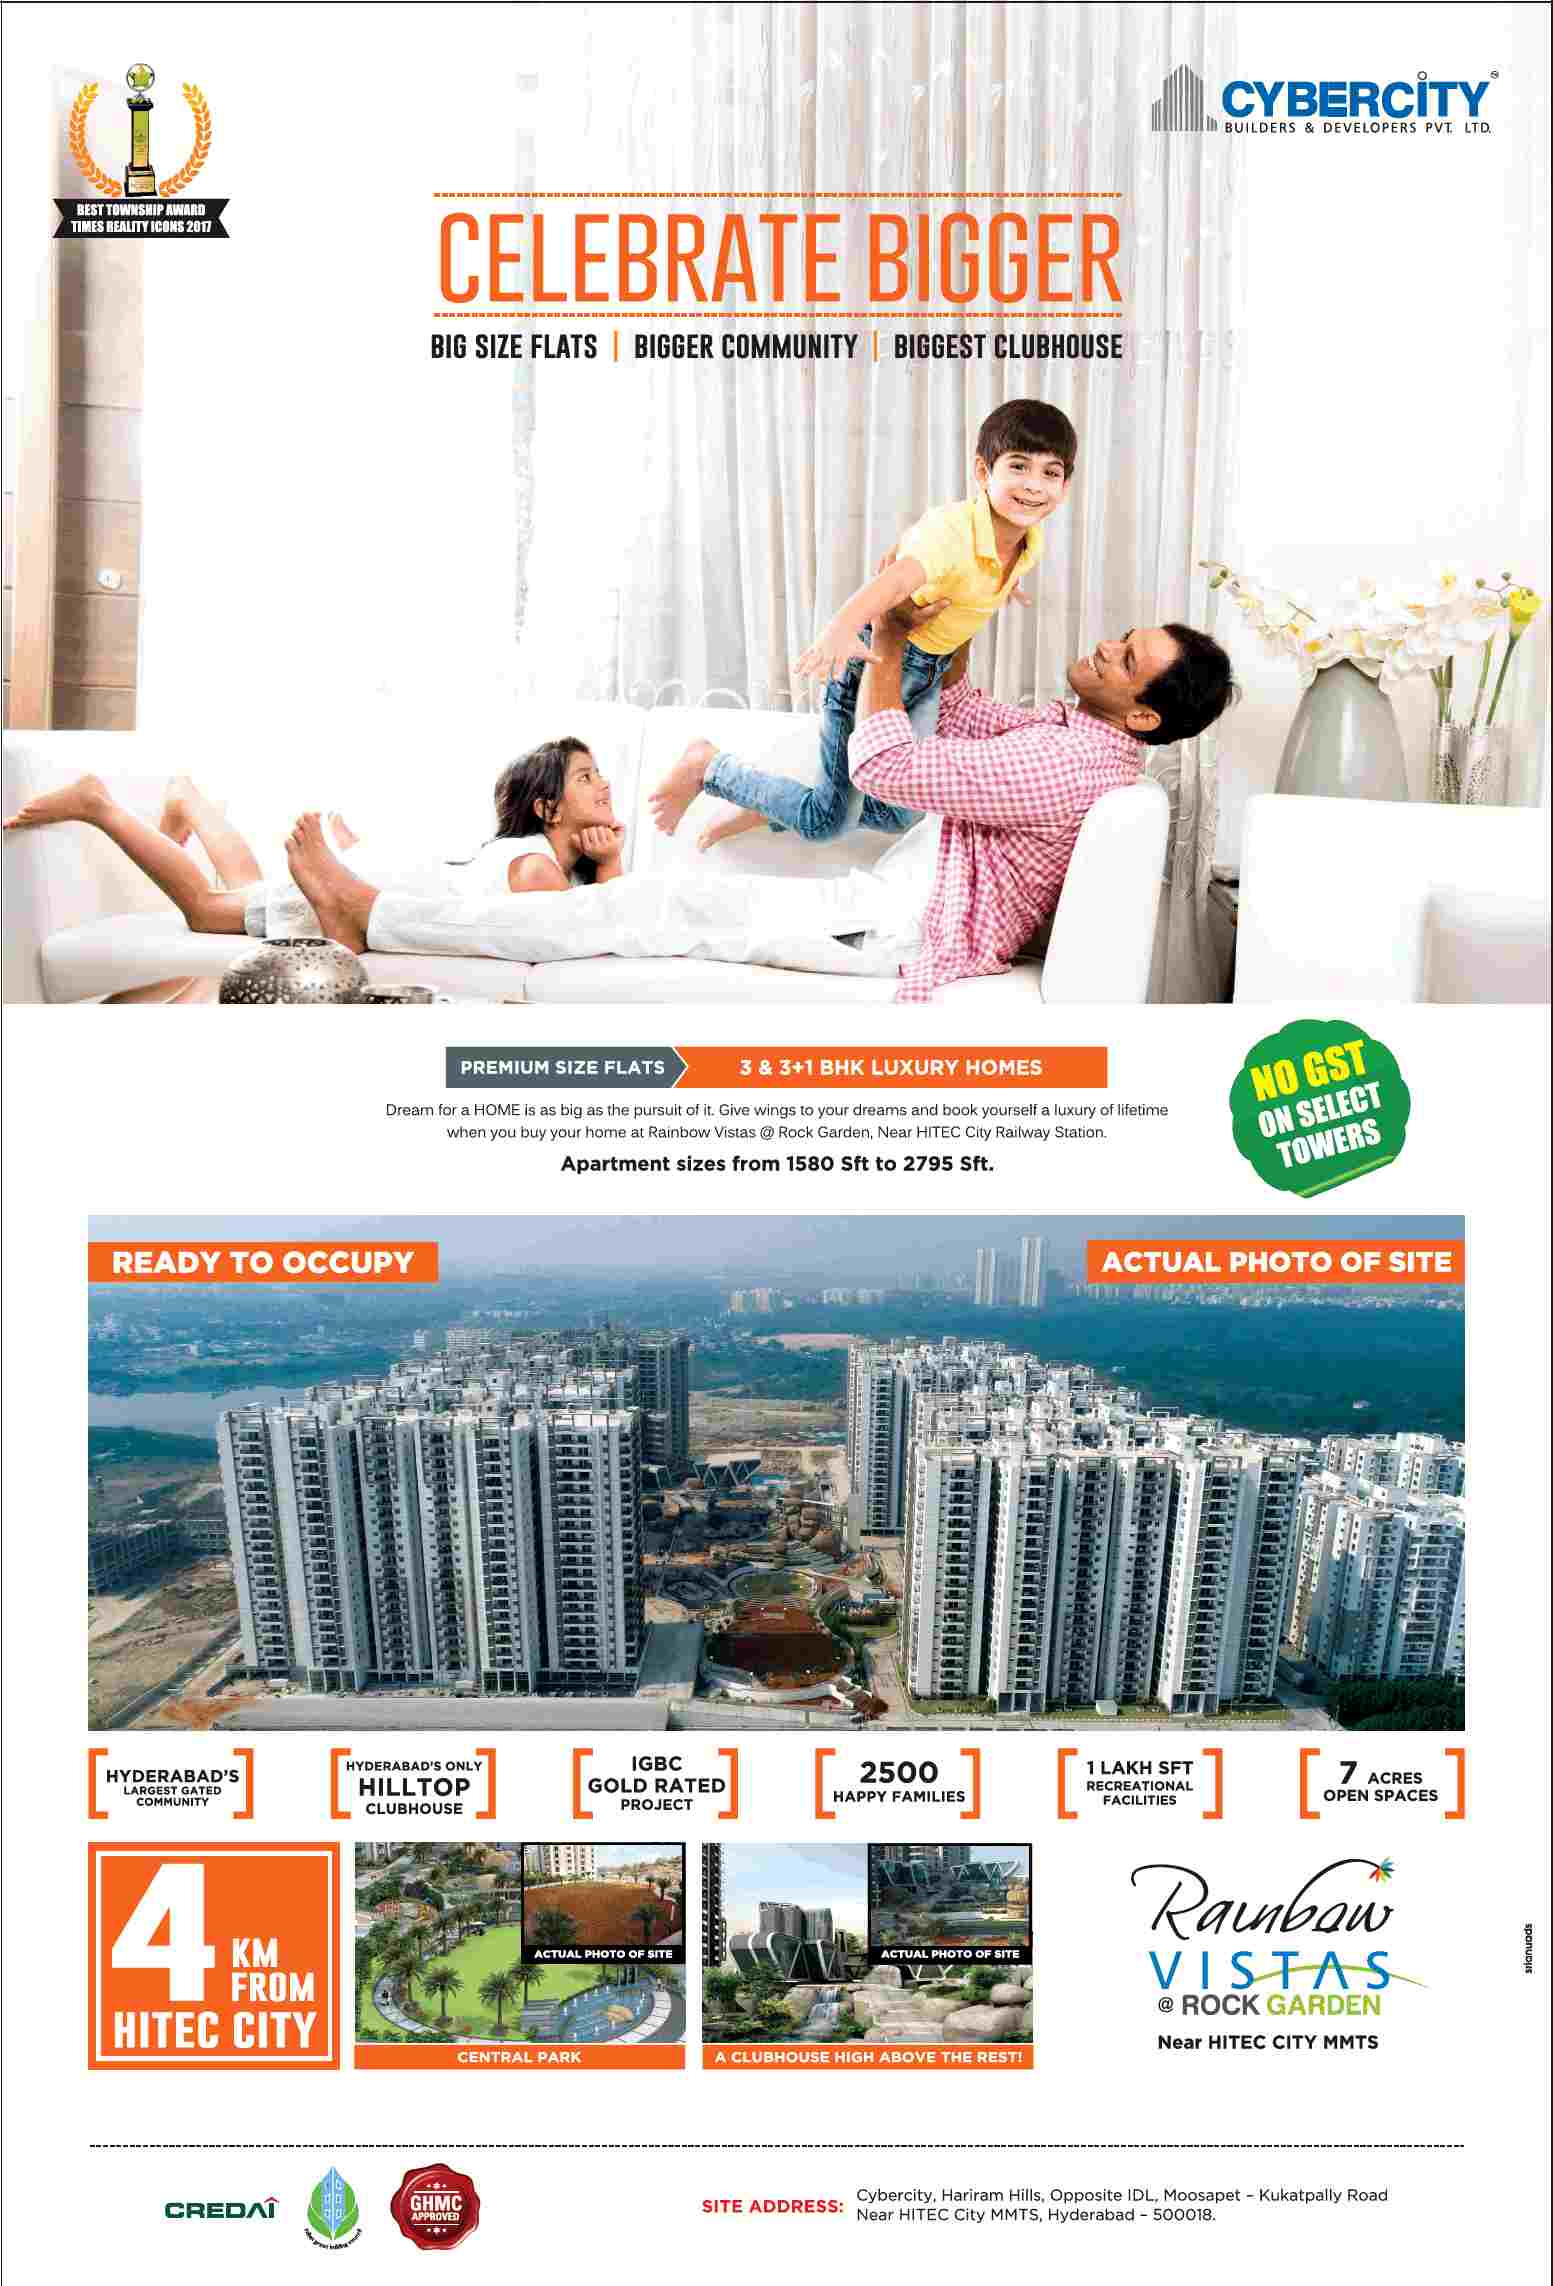 Book yourself a luxury of lifetime at Cybercity Rainbow Vistas in Hyderabad Update